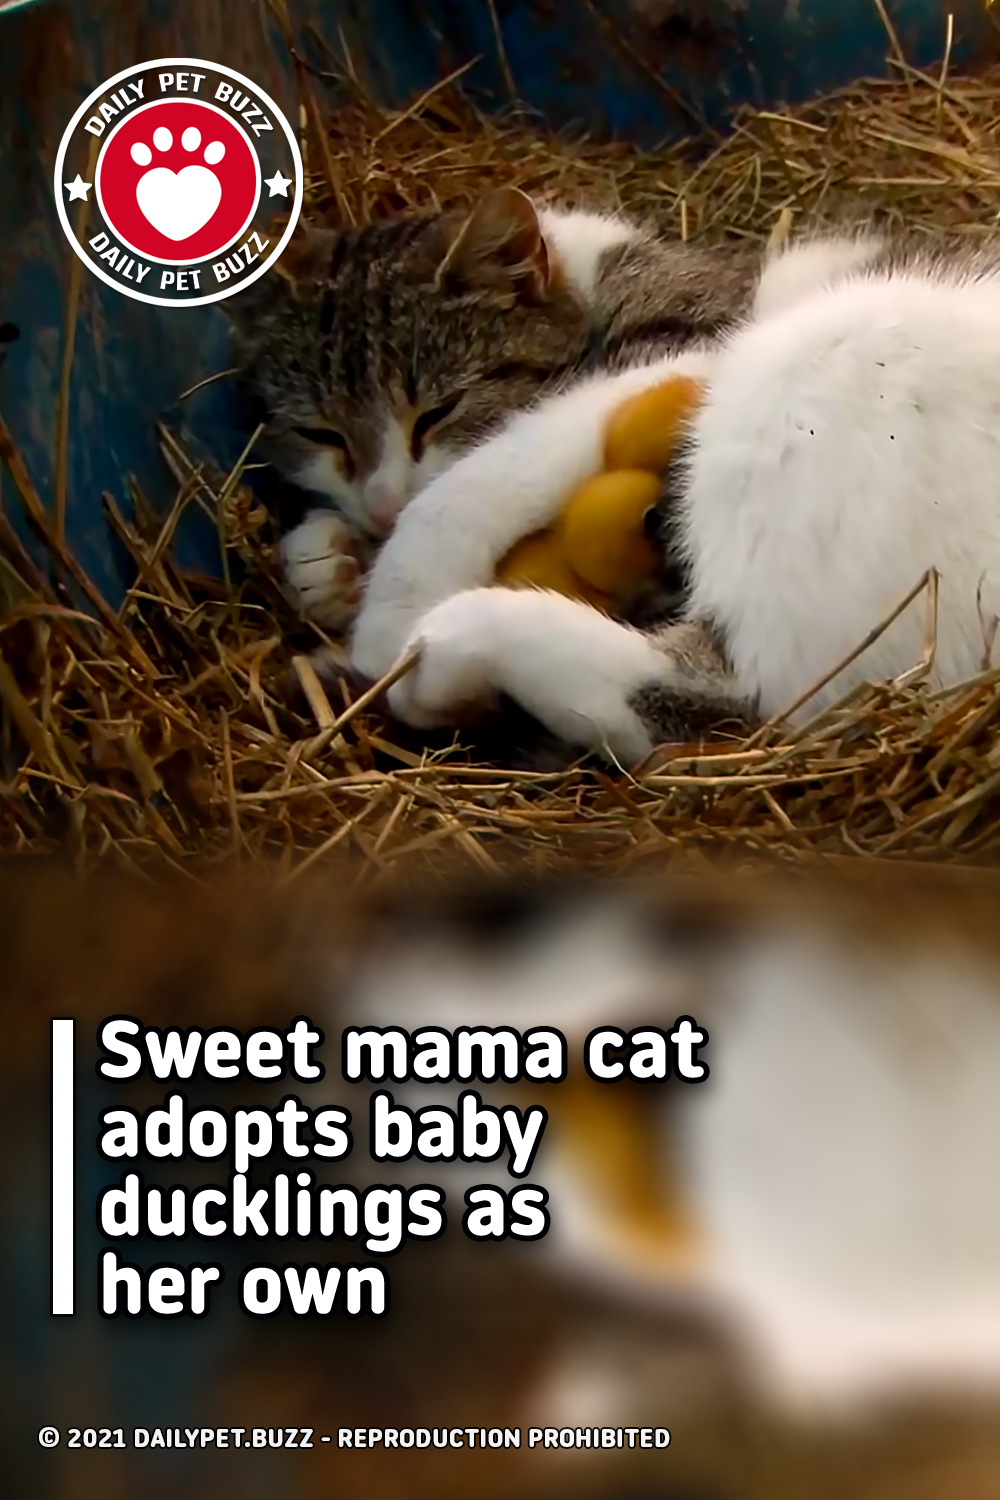 Sweet mama cat adopts baby ducklings as her own